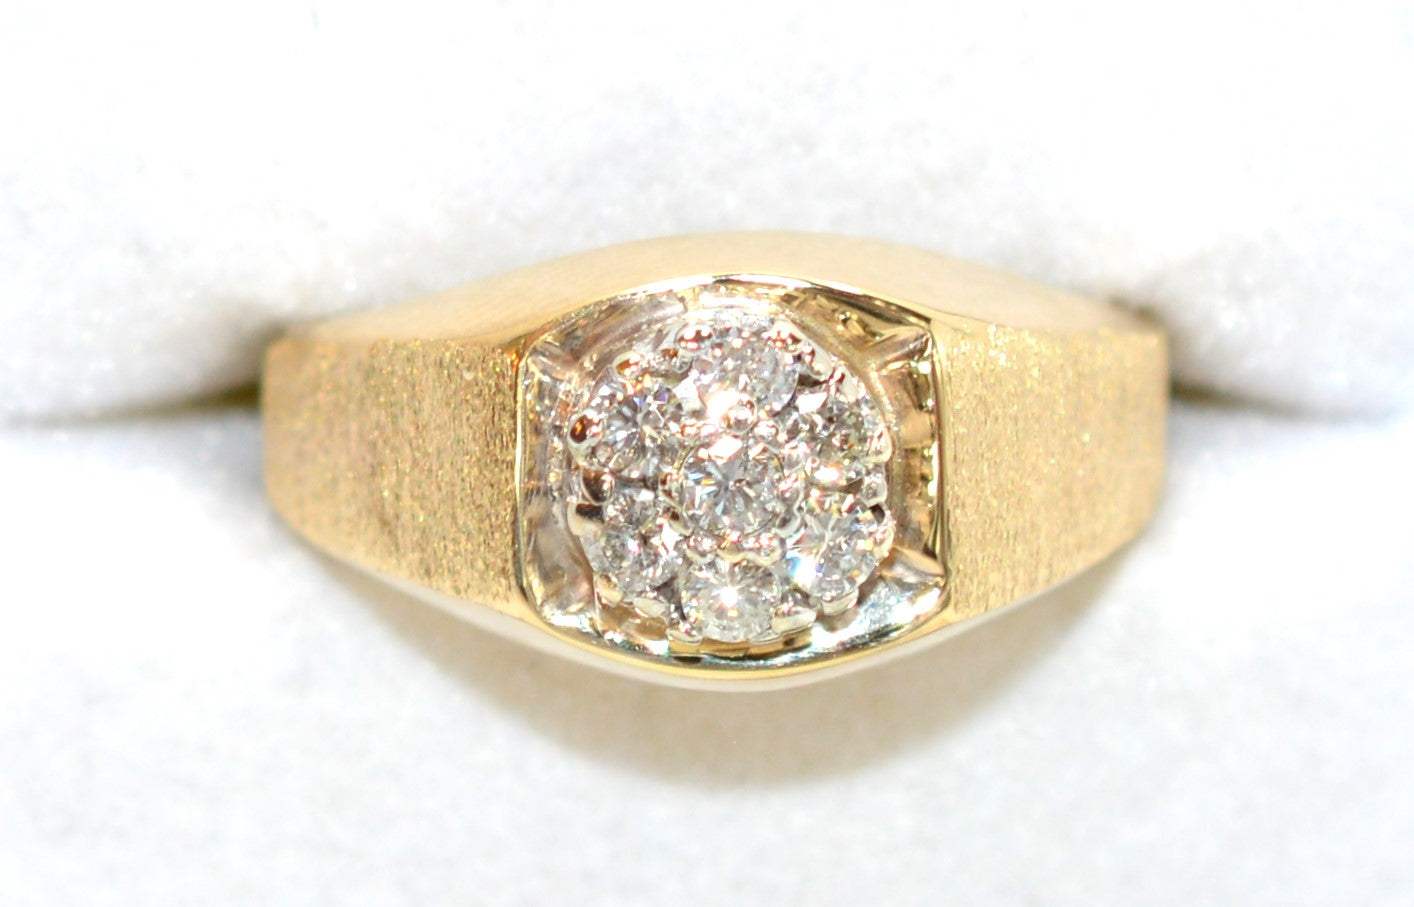 Natural Diamond Ring 14K Solid Gold .21tcw Men's Ring Cocktail Ring Statement Ring Cluster Ring Estate Jewelry Fine Vintage Jewellery Gem